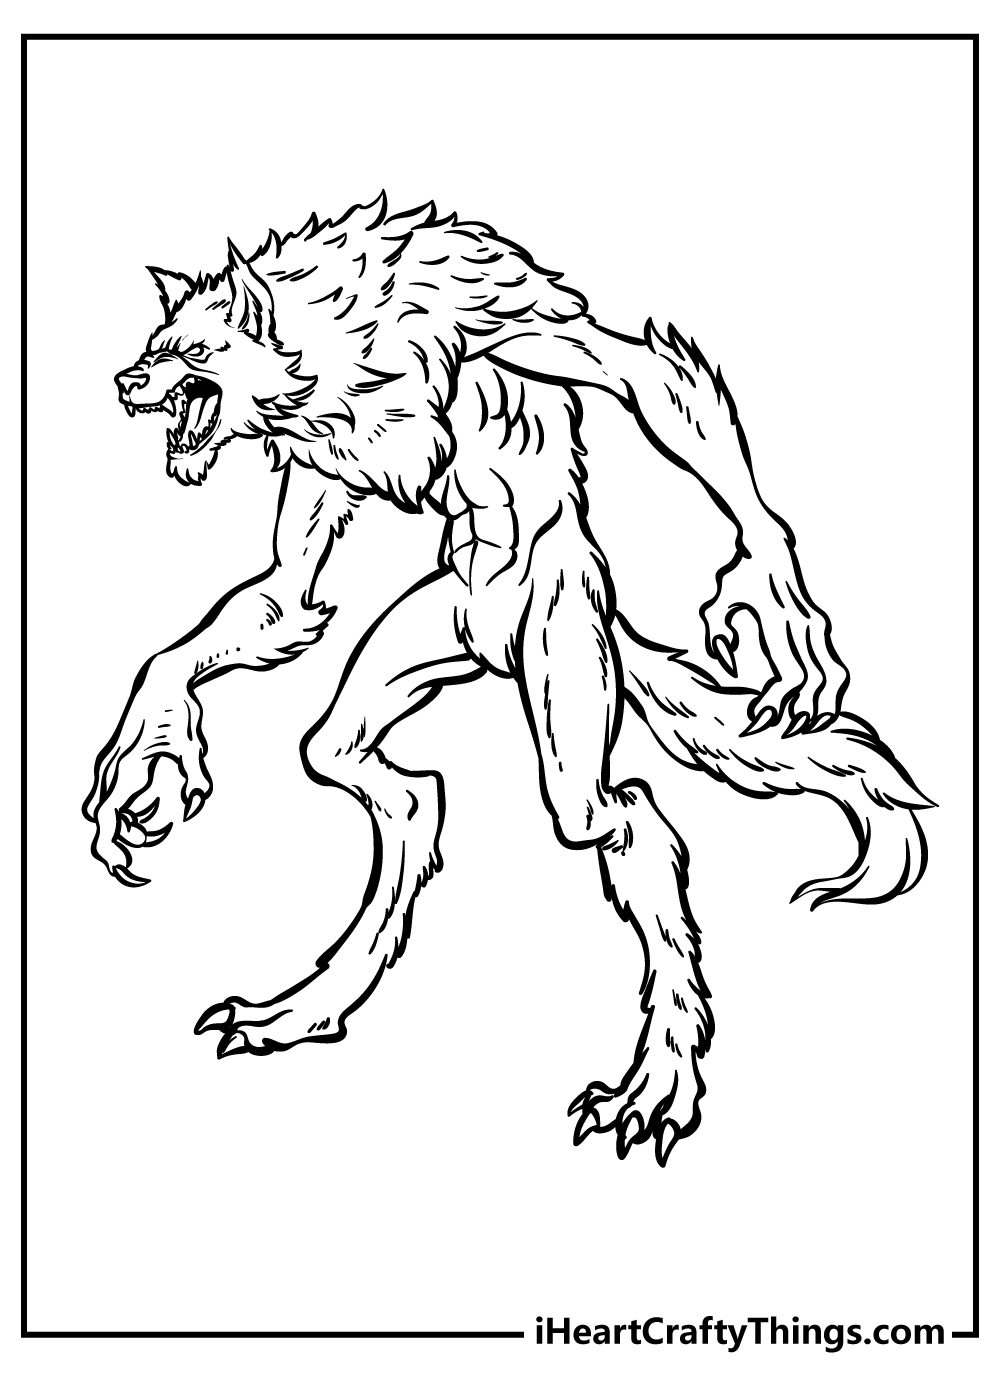 Werewolf Coloring Sheet for children free download